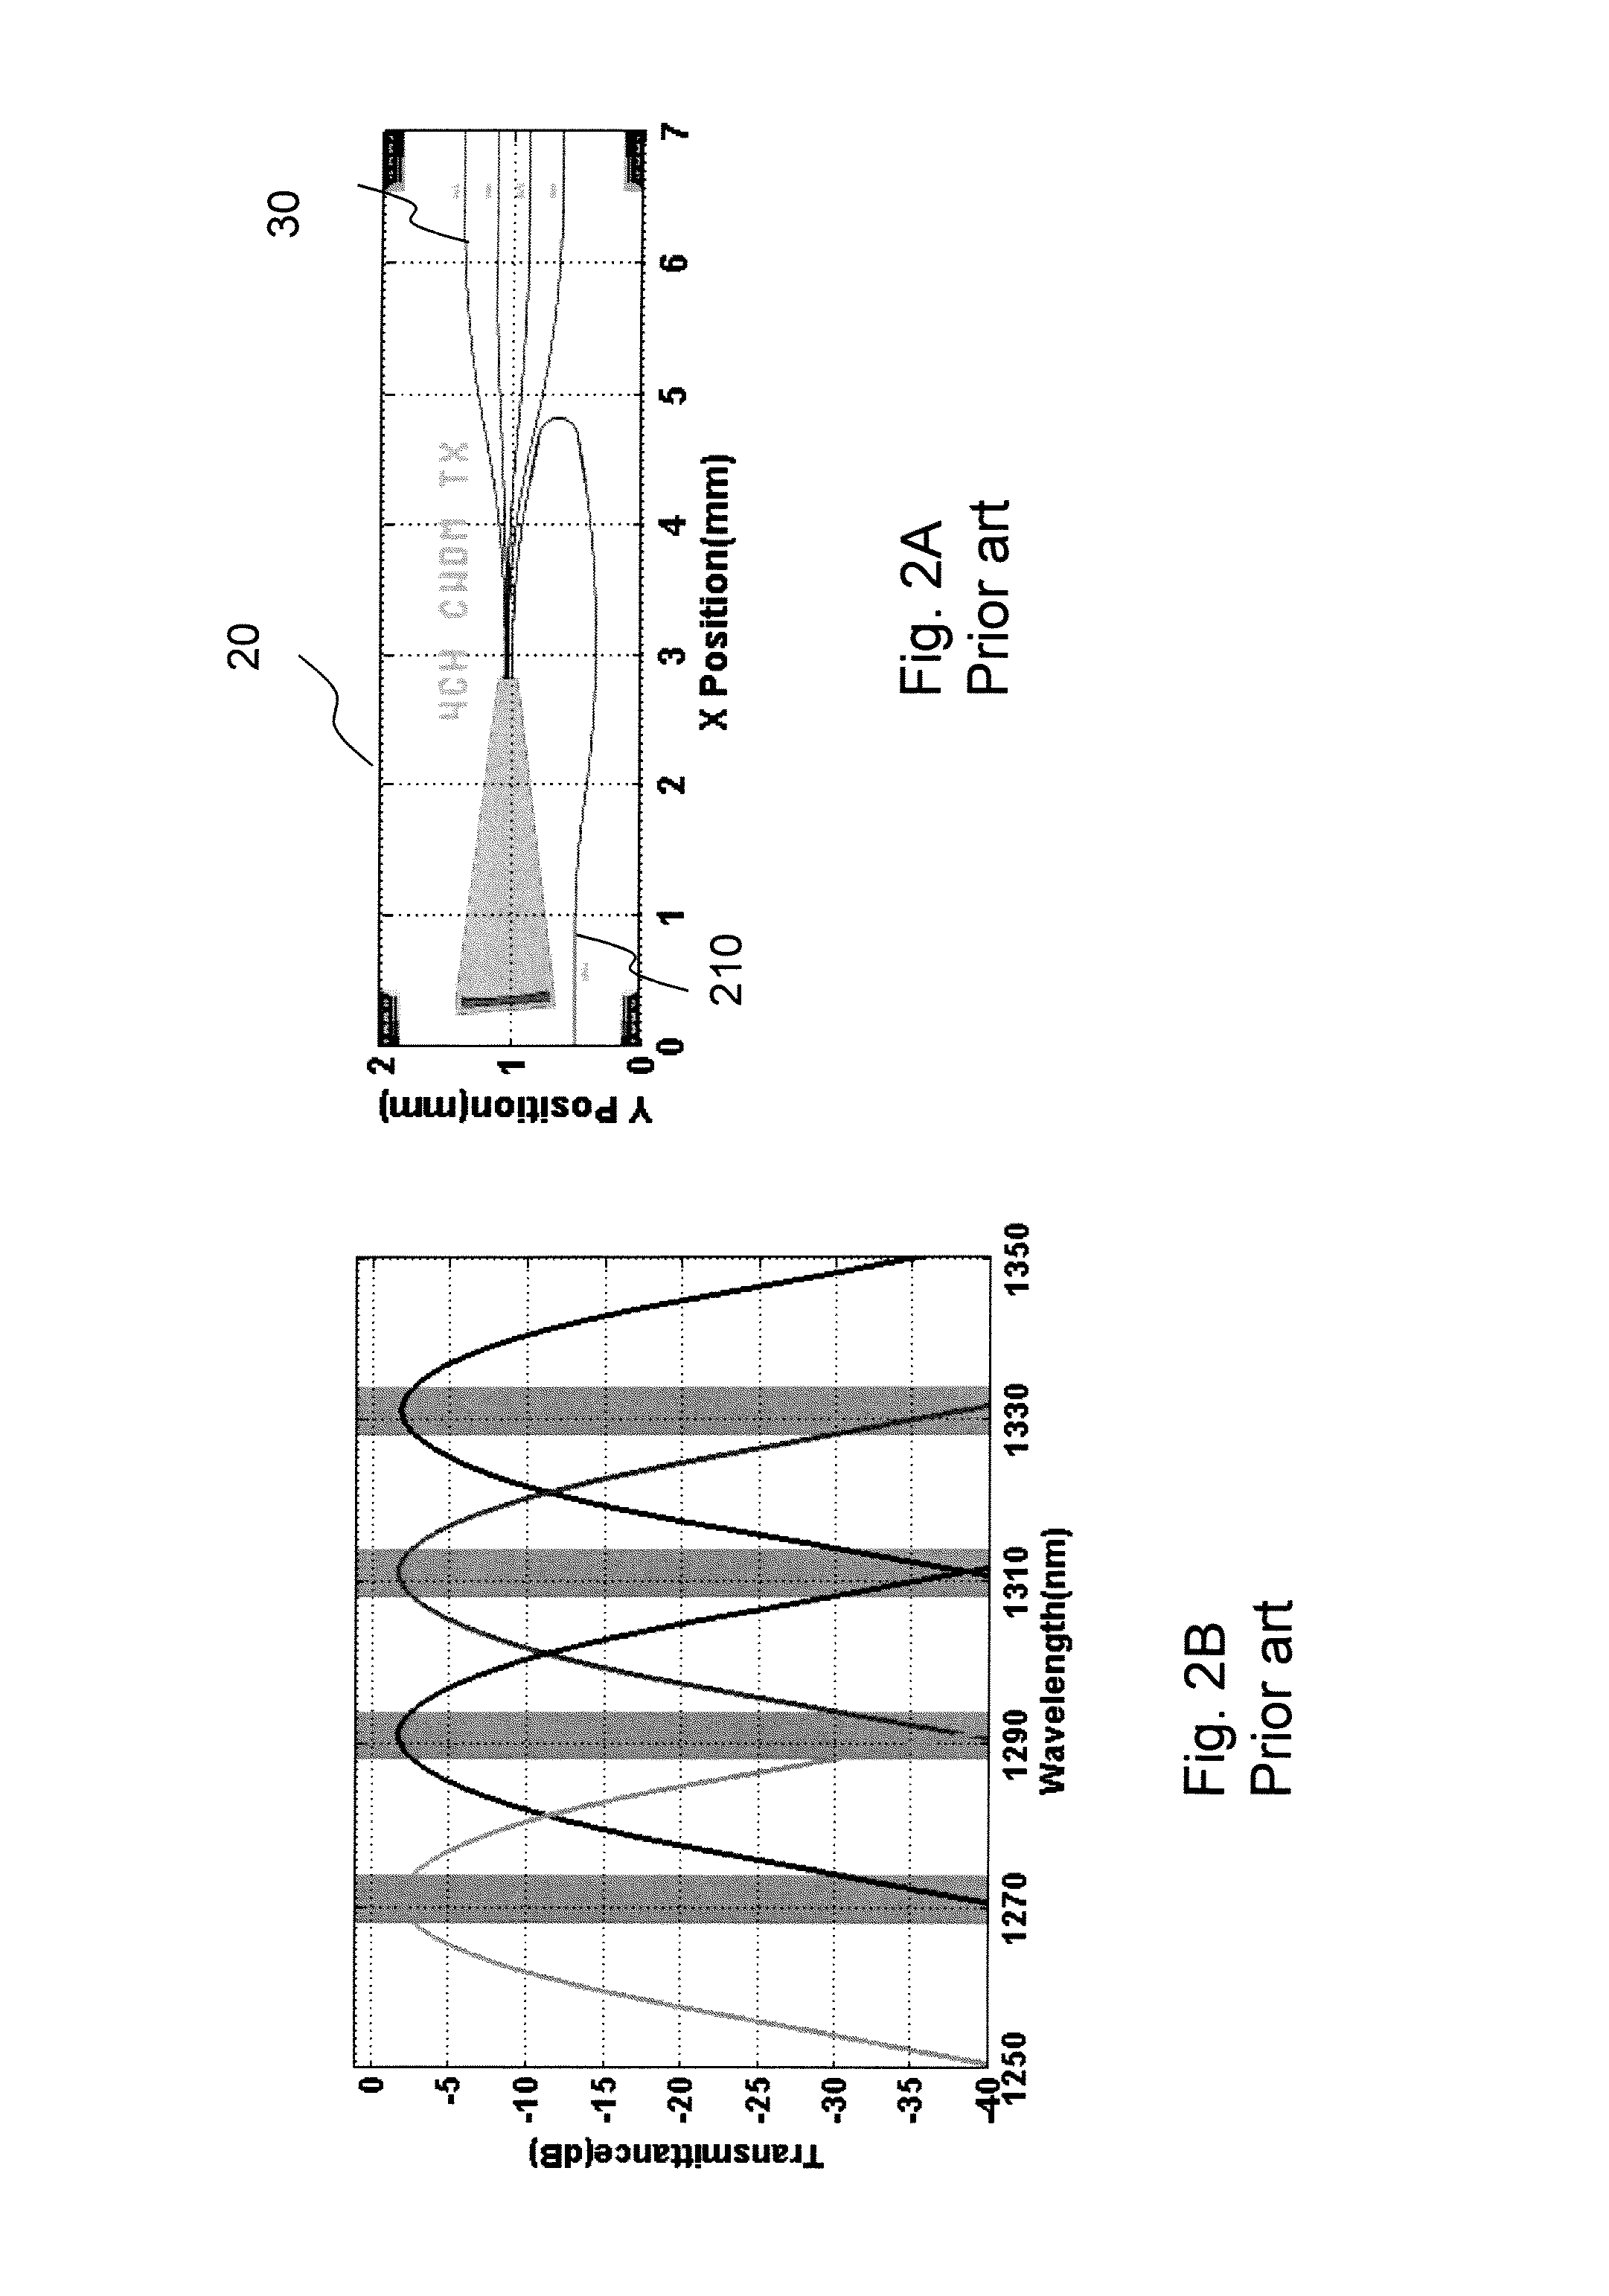 Micromechanically aligned optical assembly